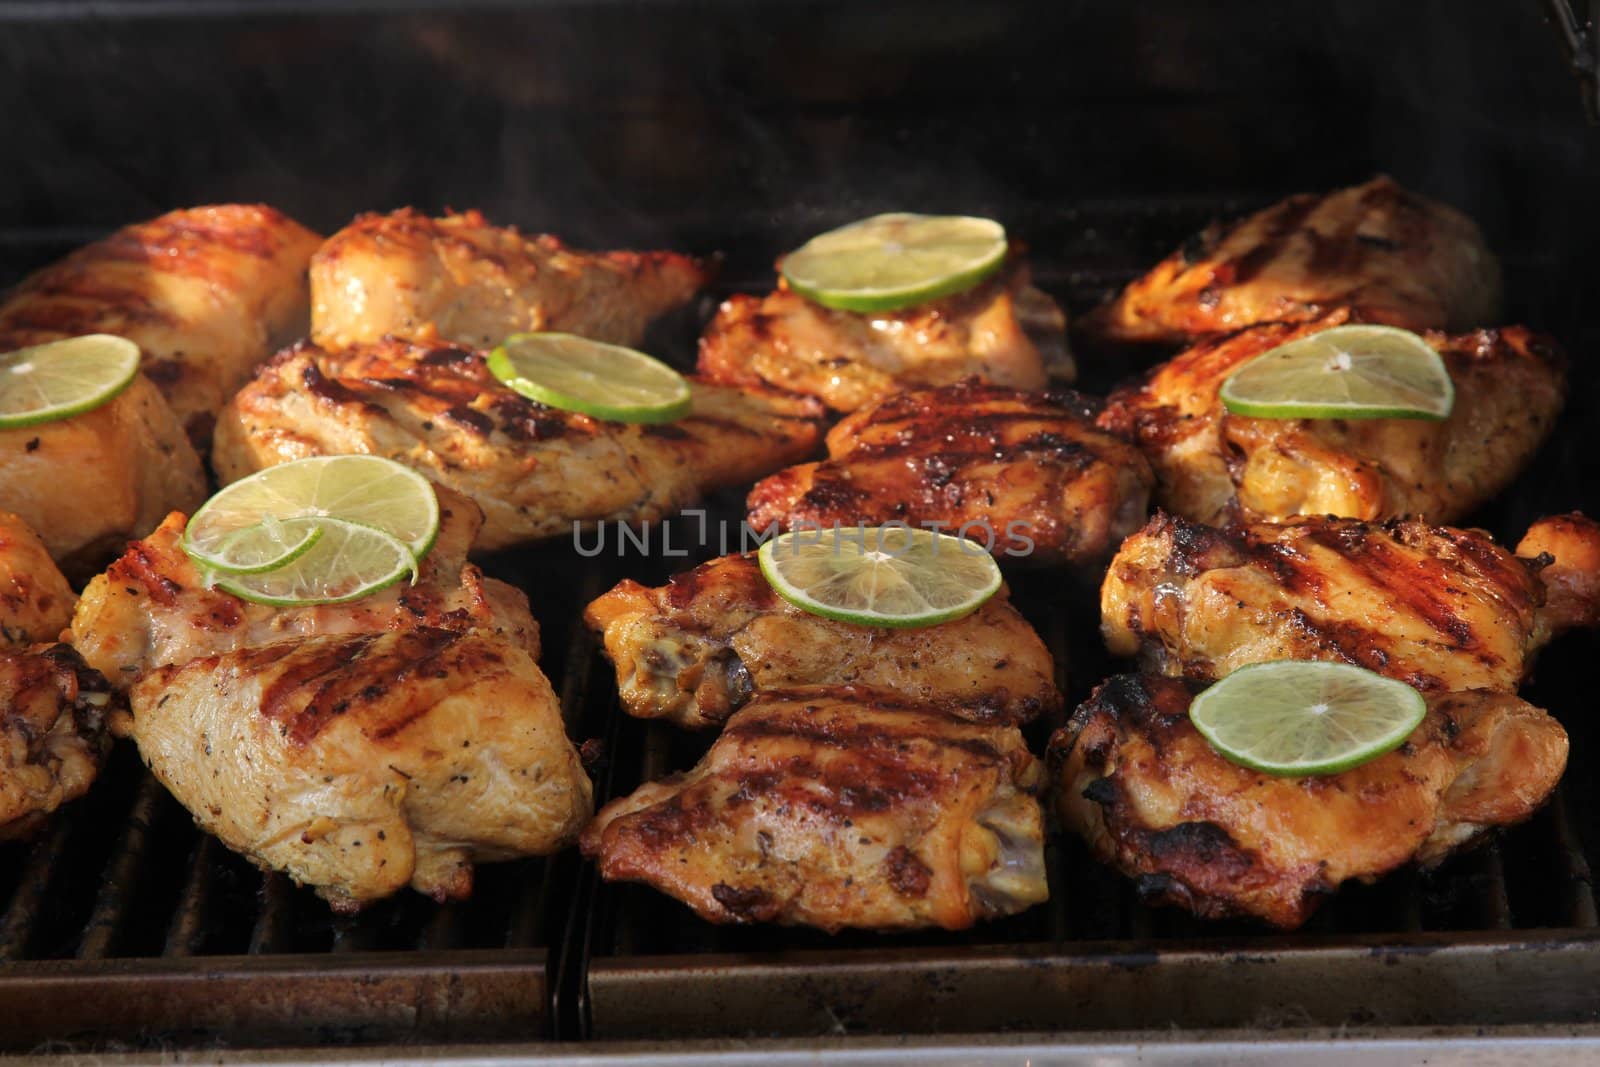 Barbeque Chicken with Lime Slice by libyphoto